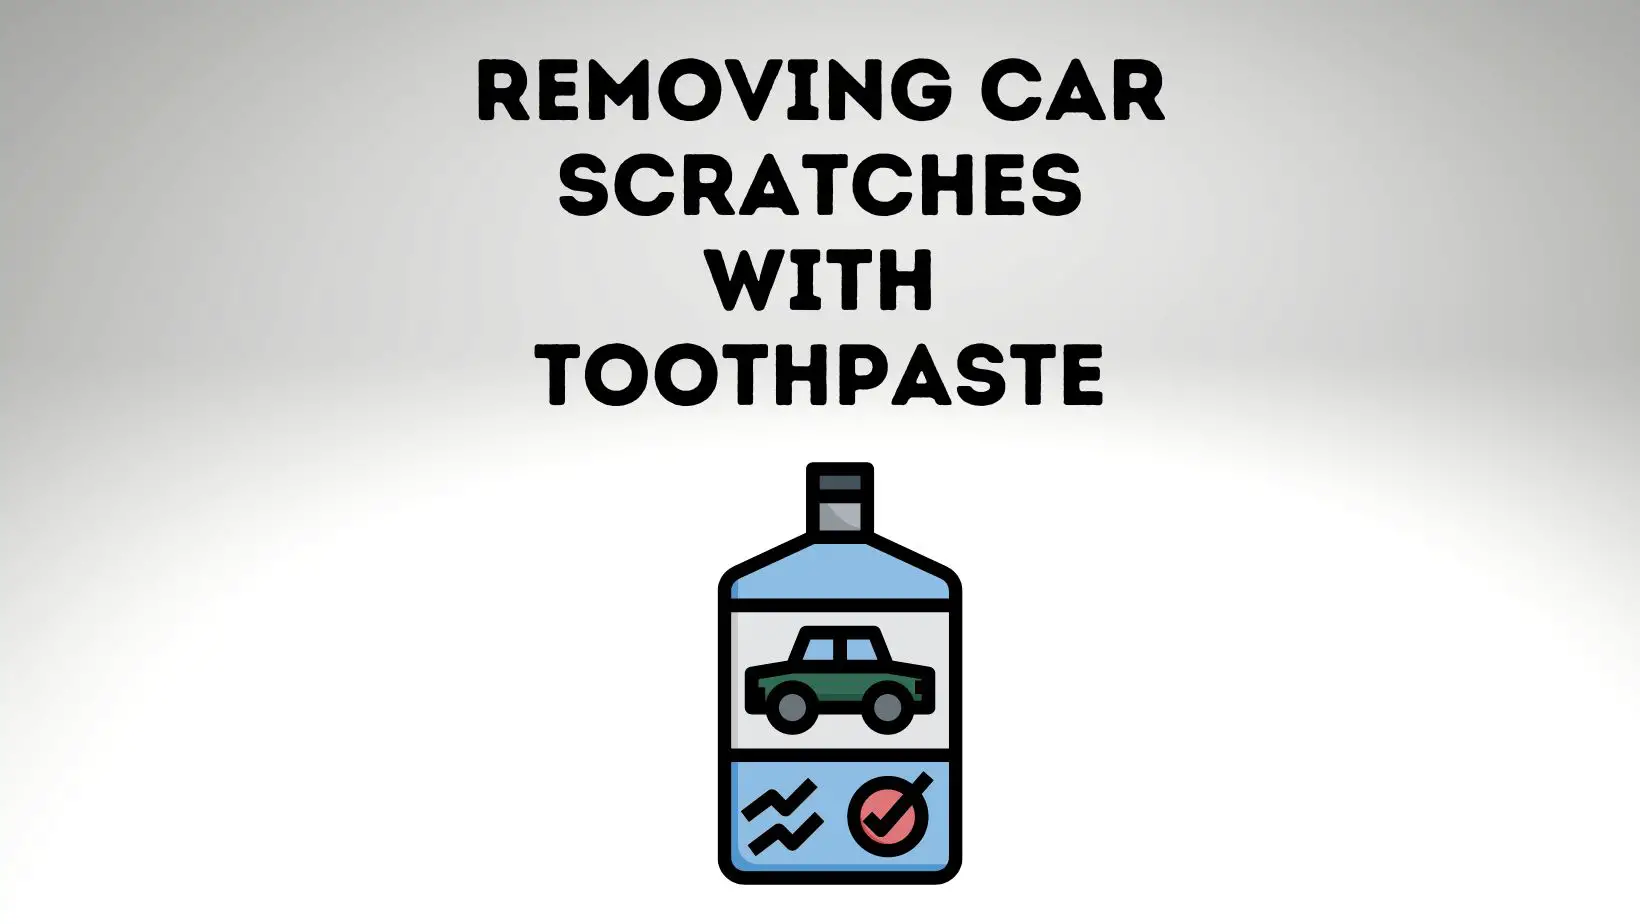 Removing Car Scratches With Toothpaste